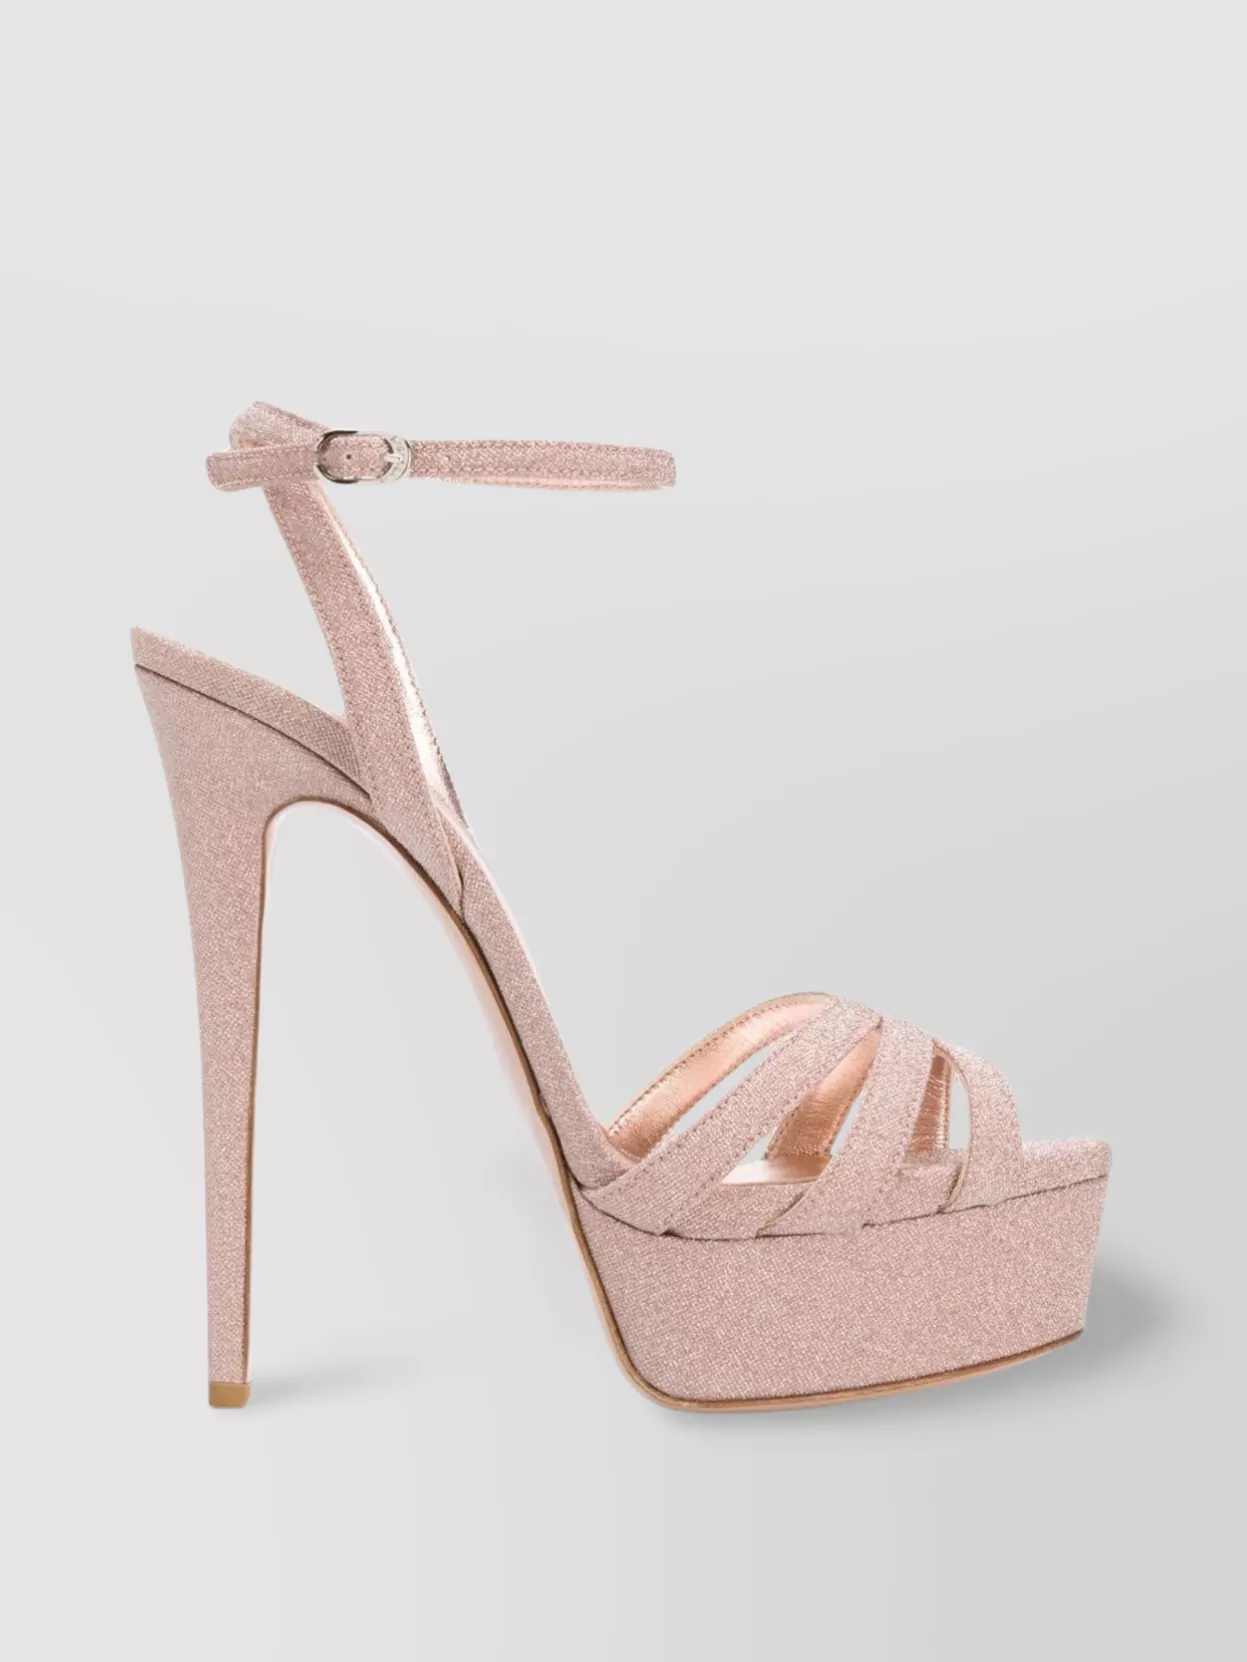 Shop Le Silla Lola's Glamorous Strappy Sandals In Pink